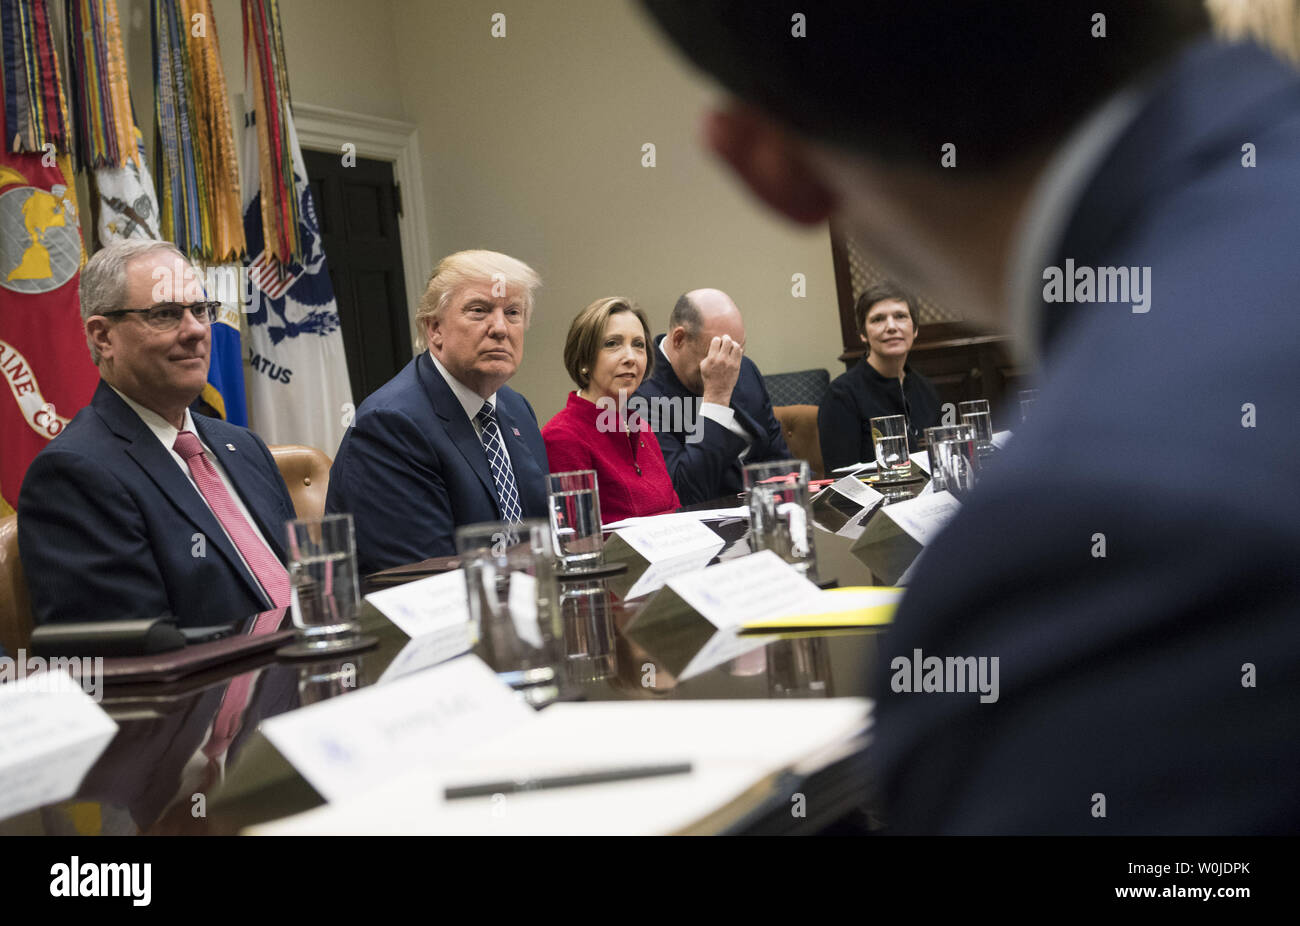 President Donald Trump (2nd-L) holds a National Economic Council listening session with the CEOs of small and community banks, in the Roosevelt Room at the White House in Washington, D.C. on March 9, 2017. Trump was joined by Kenneth Burgess (L), Chairman of the First Capital Bank of Texas; Dorothy Savarese, CEO of Cape Cod Five Mutual Company (C); Gary Cohn, National Economic Council Director; and Leslie Anderson, CEO of Bank of Bennington. Photo by Kevin Dietsch/UPI Stock Photo